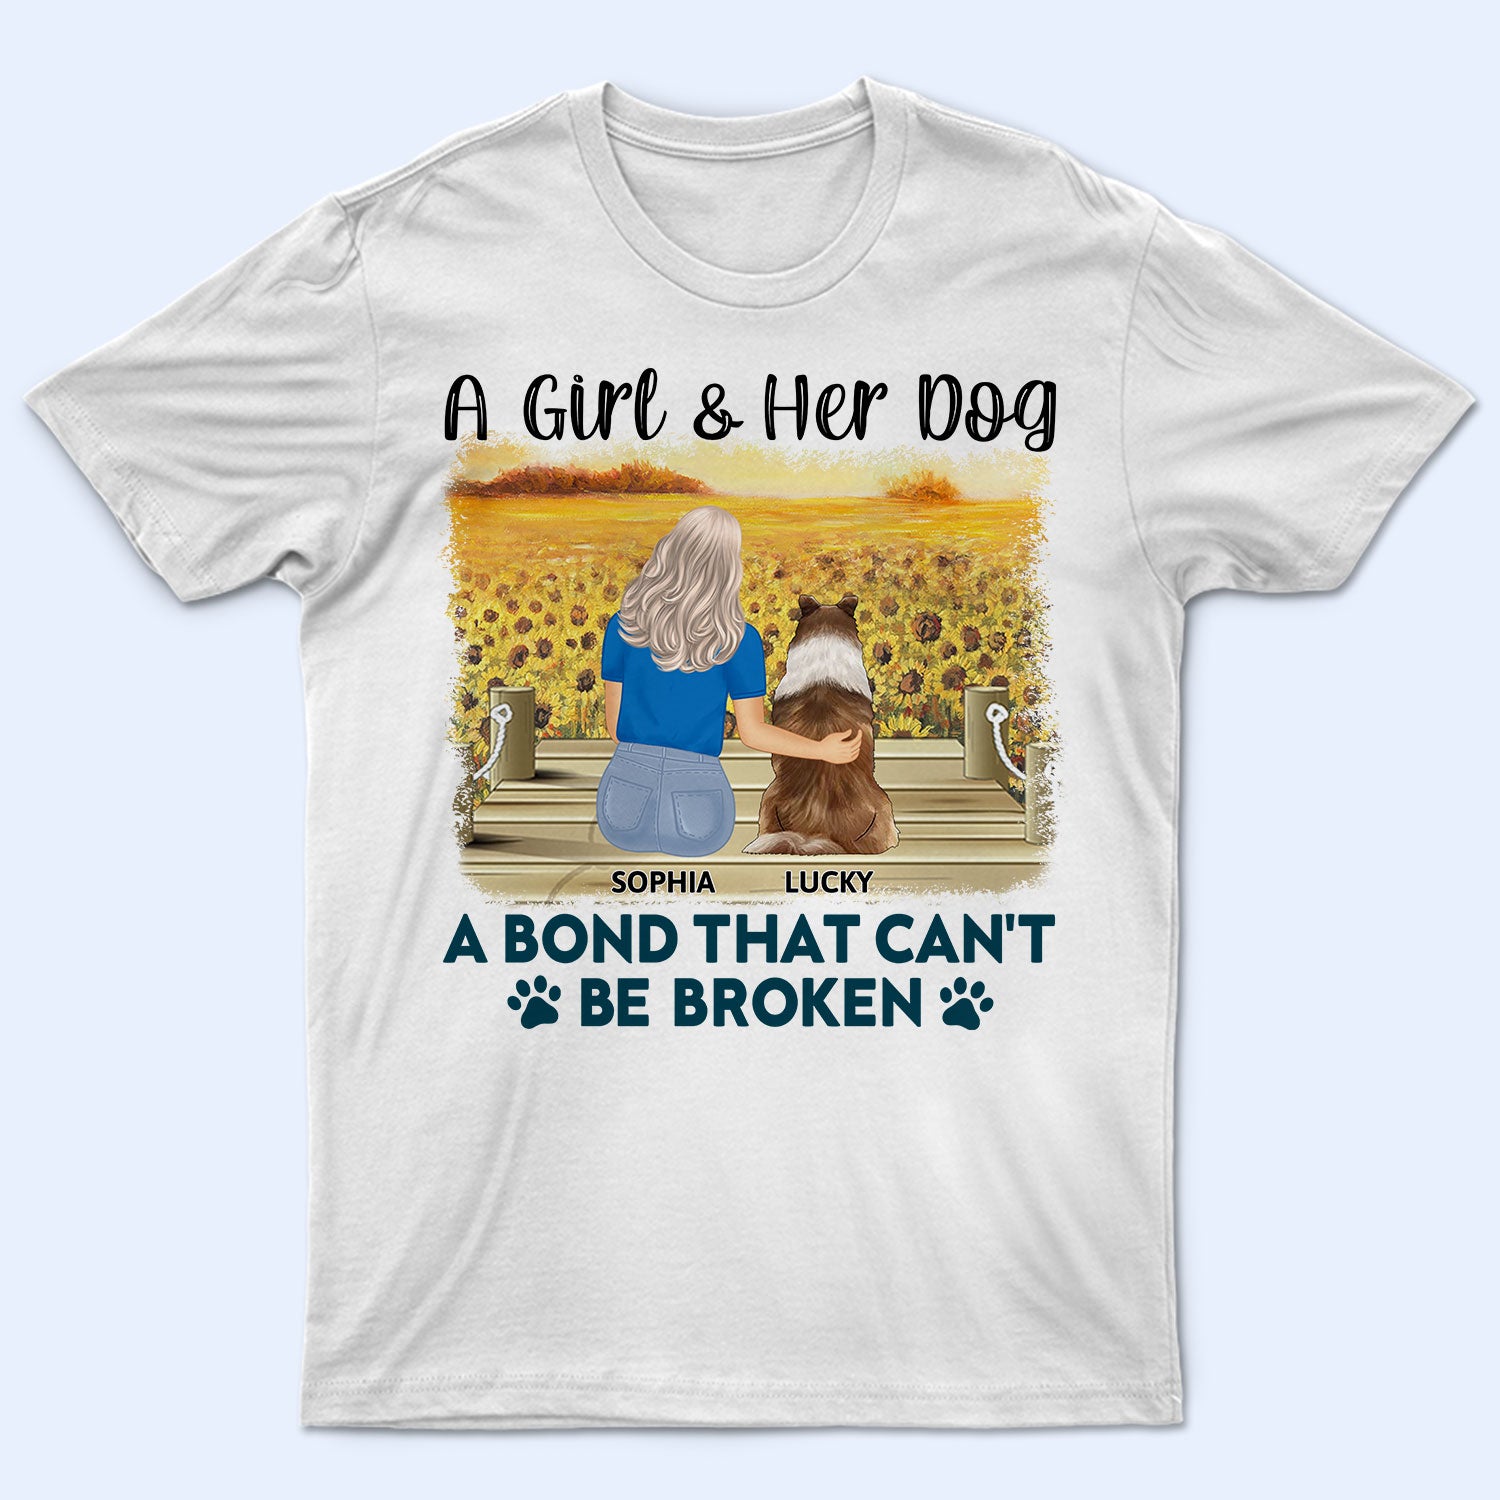 A Bond That Can't Be Broken - Gift For Dog Lovers, Dog Mom, Dog Dad - Personalized T Shirt